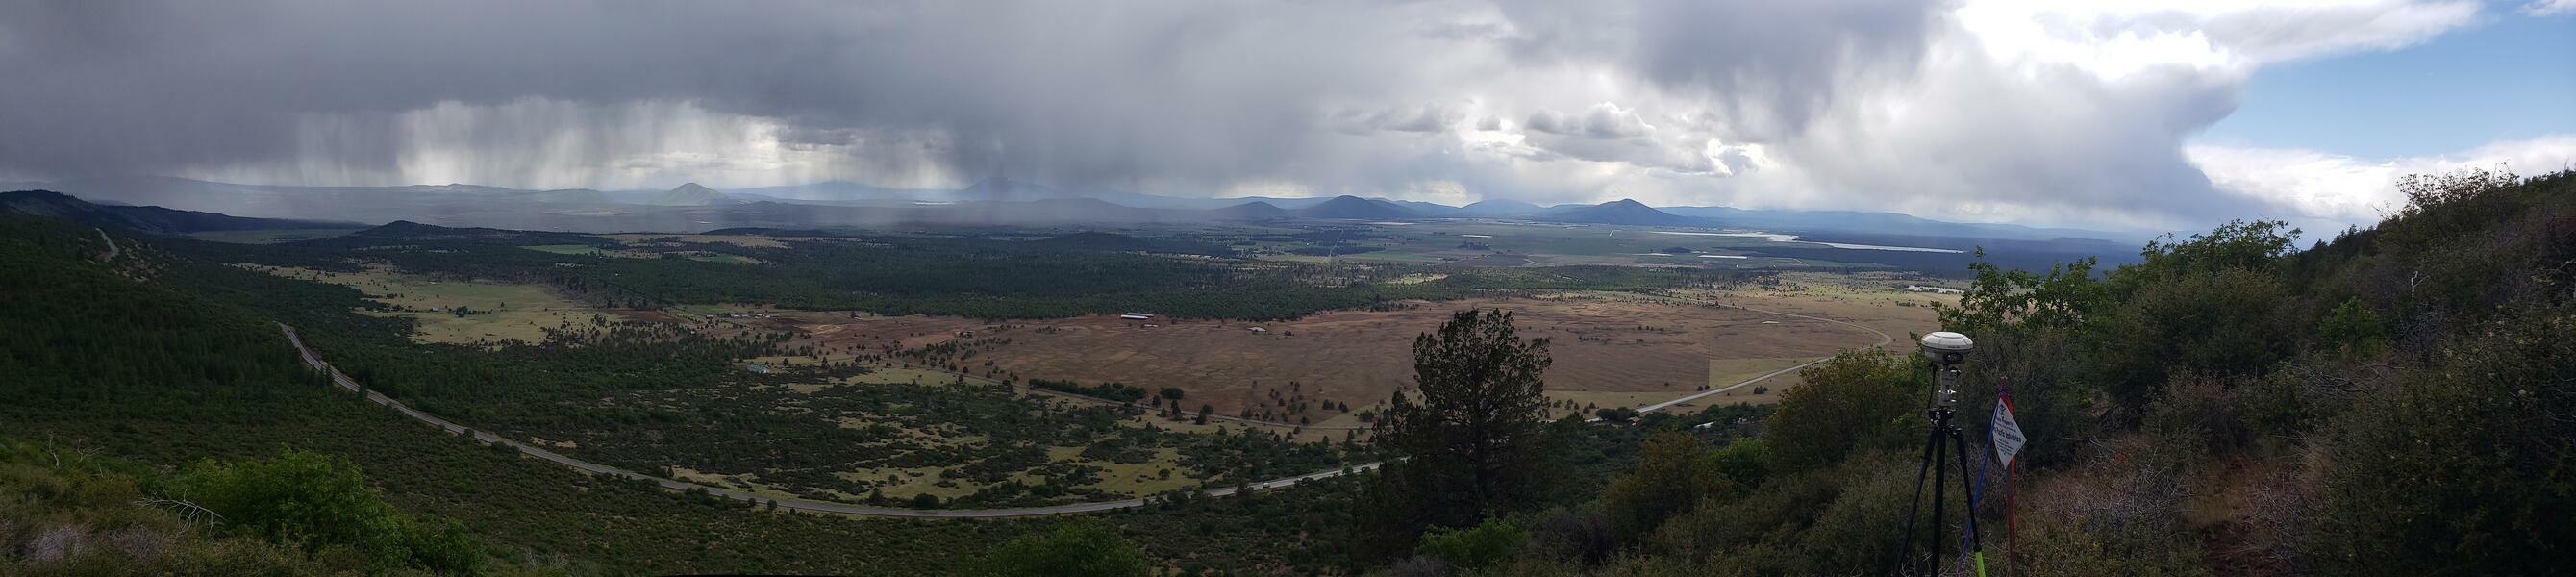 image from shasta land surveying on the job overlooking the valley